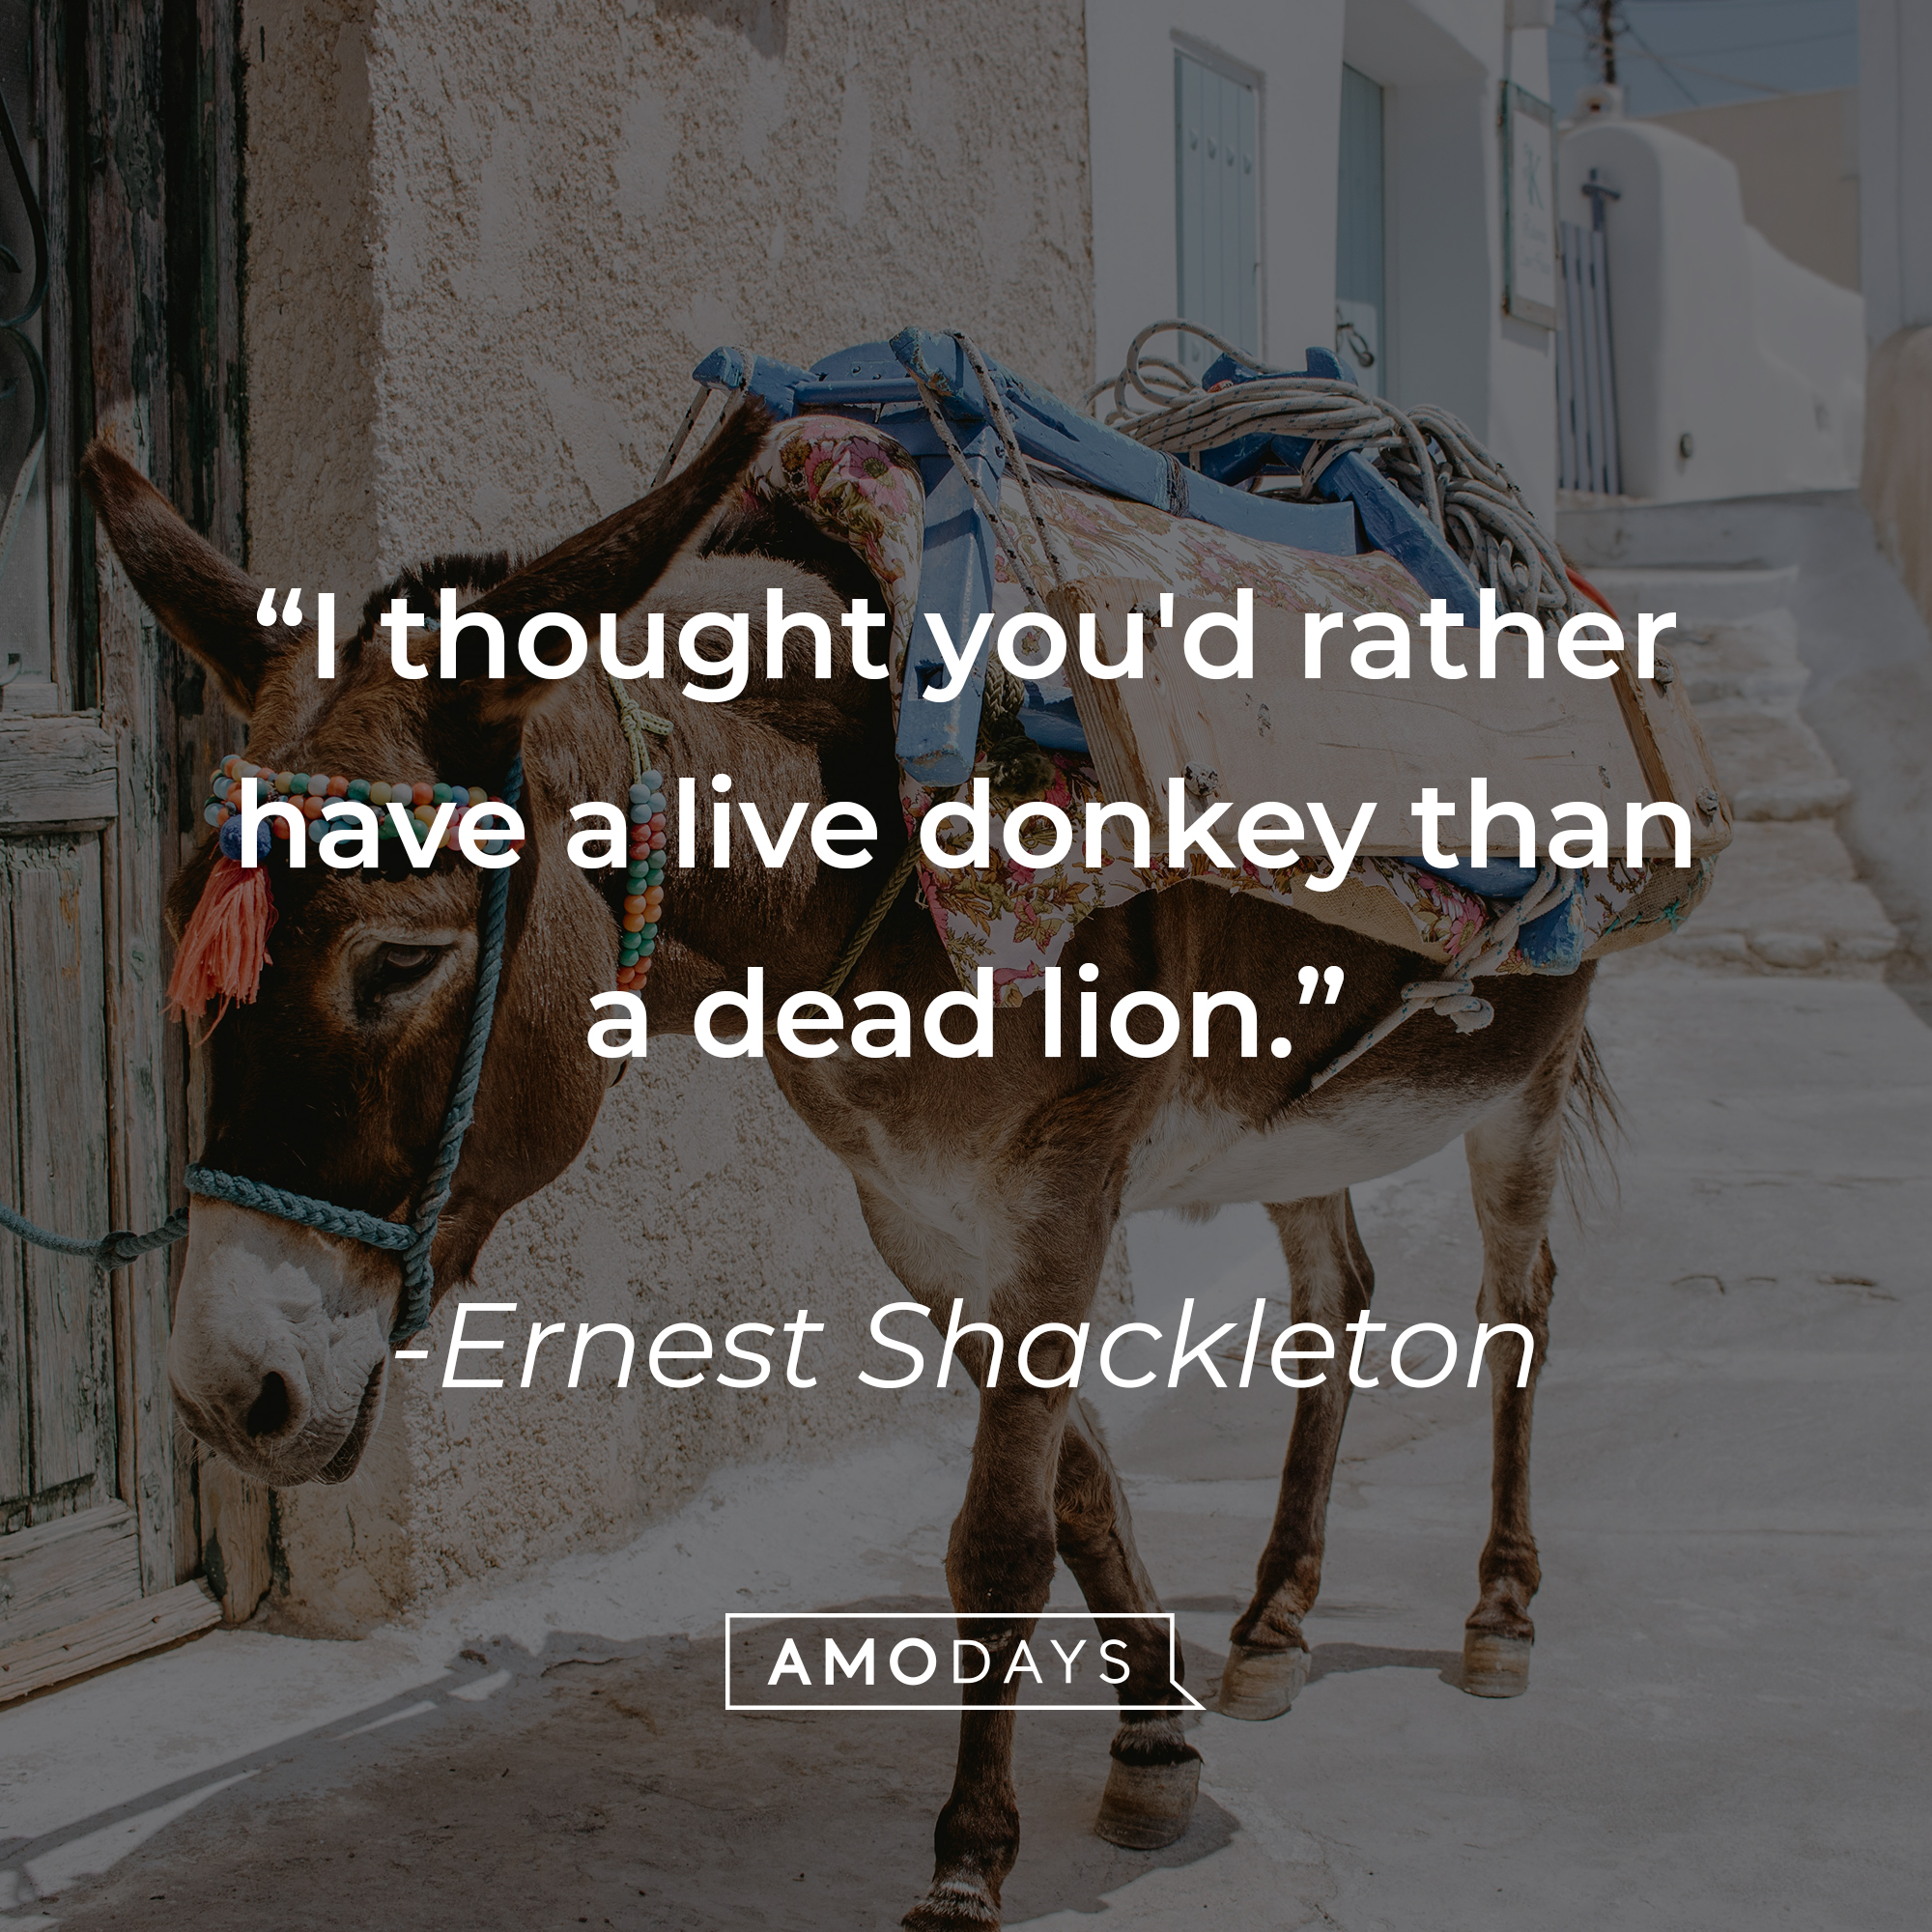 Earnest Shackleton's quote: "I thought you'd rather have a live donkey than a dead lion." | Source: Unsplash